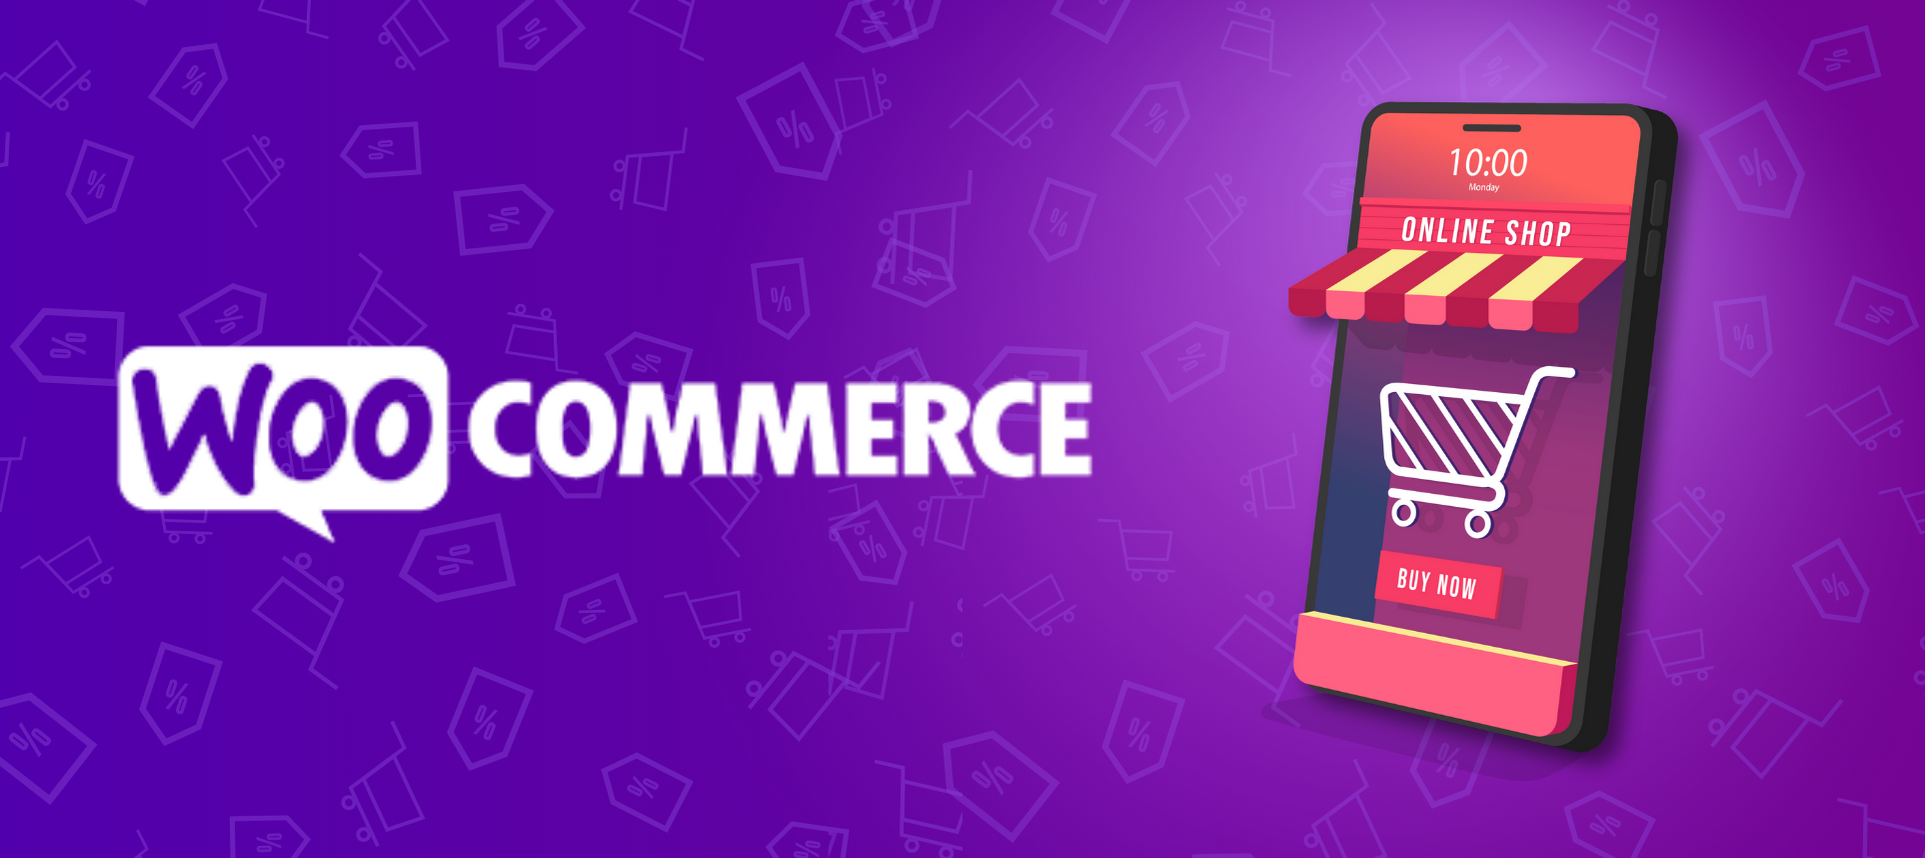 Ready to Rock Your Online Store? Meet WooCommerce!